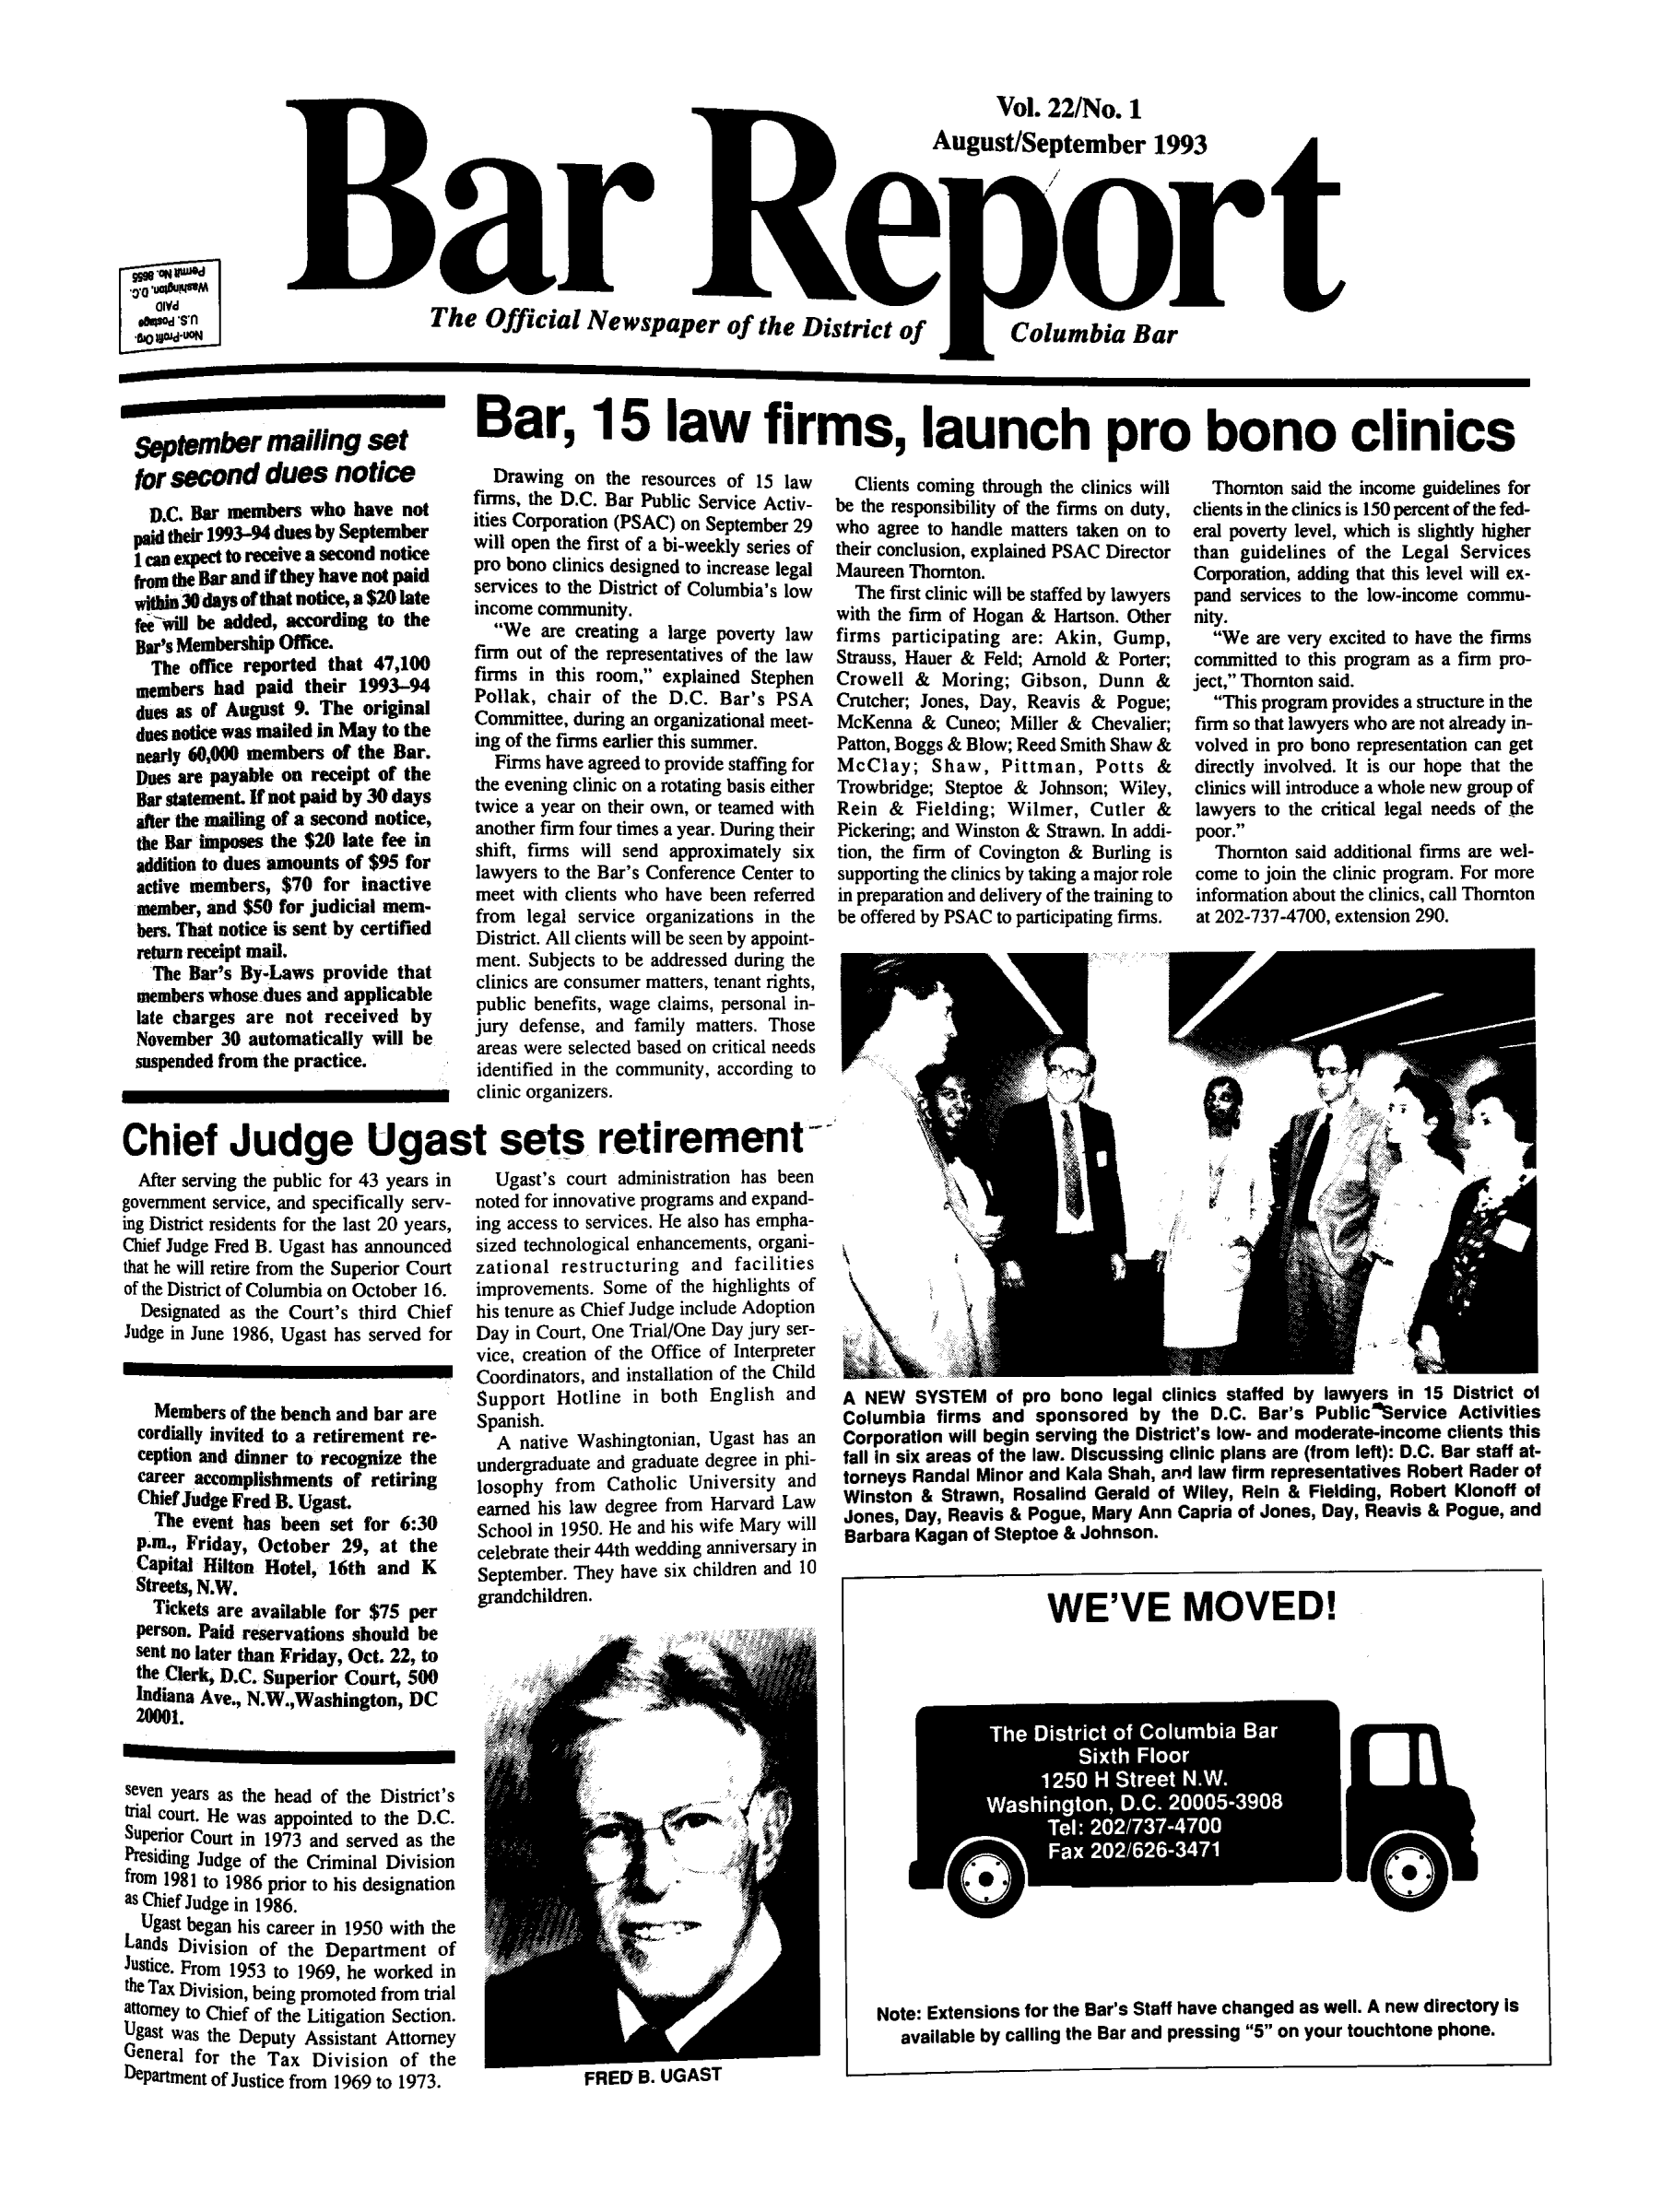 handle is hein.barjournals/breport0024 and id is 1 raw text is: Vol. 22/No. 1
August/September 1993
Bartort
tow.O           The Official Newspaper of the District of  Columbia Bar

September mailing set
for second dues notice
D.C. Bar members who have not
paid their 1993-94 dues by September
lcan expect to receive a second notice
from the Bar and if they have not paid
wbin30 days of that notice, a $20 late
fee will be added, according to the
Bar's Membership Office.
The office reported that 47,100
members had paid their 1993-94
dues as of August 9. The original
dues notice was mailed in May to the
nearly 60,000 members of the Bar.
Does are payable on receipt of the
Bar statement. If not paid by 30 days
after the maiing of a second notice,
the Bar imposes the $20 late fee in
addition to dues amounts of $95 for
active members, $70 for inactive
member, and $50 for judicial mem-
bers. That notice is sent by certified
return receipt mail.
The Bar's By-Laws provide that
members whose dues and applicable
late charges are not received by
November 30 automatically will be
suspended from the practice.

Bar, 15 law firms, launch pro bono clinics

Drawing on the resources of 15 law
firms, the D.C. Bar Public Service Activ-
ities Corporation (PSAC) on September 29
will open the first of a bi-weekly series of
pro bono clinics designed to increase legal
services to the District of Columbia's low
income community.
We are creating a large poverty law
firm out of the representatives of the law
firms in this room, explained Stephen
Pollak, chair of the D.C. Bar's PSA
Committee, during an organizational meet-
ing of the firms earlier this summer.
Firms have agreed to provide staffing for
the evening clinic on a rotating basis either
twice a year on their own, or teamed with
another firm four times a year. During their
shift, firms will send approximately six
lawyers to the Bar's Conference Center to
meet with clients who have been referred
from legal service organizations in the
District. All clients will be seen by appoint-
ment. Subjects to be addressed during the
clinics are consumer matters, tenant rights,
public benefits, wage claims, personal in-
jury defense, and family matters. Those
areas were selected based on critical needs
identified in the community, according to
clinic organizers.

Clients coming through the clinics will
be the responsibility of the firms on duty,
who agree to handle matters taken on to
their conclusion, explained PSAC Director
Maureen Thornton.
The first clinic will be staffed by lawyers
with the firm of Hogan & Hartson. Other
firms participating are: Akin, Gump,
Strauss, Hauer & Feld; Arnold & Porter;
Crowell & Moring; Gibson, Dunn &
Crutcher; Jones, Day, Reavis & Pogue;
McKenna & Cuneo; Miller & Chevalier;
Patton, Boggs & Blow; Reed Smith Shaw &
McClay; Shaw, Pittman, Potts &
Trowbridge; Steptoe & Johnson; Wiley,
Rein & Fielding; Wilmer, Cutler &
Pickering; and Winston & Strawn. In addi-
tion, the firm of Covington & Burling is
supporting the clinics by taking a major role
in preparation and delivery of the training to
be offered by PSAC to participating firms.

Thornton said the income guidelines for
clients in the clinics is 150 percent of the fed-
eral poverty level, which is slightly higher
than guidelines of the Legal Services
Corporation, adding that this level will ex-
pand services to the low-income commu-
nity.
We are very excited to have the firms
committed to this program as a firm pro-
ject, Thornton said.
This program provides a structure in the
firm so that lawyers who are not already in-
volved in pro bono representation can get
directly involved. It is our hope that the
clinics will introduce a whole new group of
lawyers to the critical legal needs of the
poor.
Thornton said additional firms are wel-
come to join the clinic program. For more
information about the clinics, call Thornton
at 202-737-4700, extension 290.

Chief Judge Ugast sets retirement

After serving the public for 43 years in
government service, and specifically serv-
ing District residents for the last 20 years,
Chief Judge Fred B. Ugast has announced
that he will retire from the Superior Court
of the District of Columbia on October 16.
Designated as the Court's third Chief
Judge in June 1986, Ugast has served for
Members of the bench and bar are
cordially invited to a retirement re-
ception and dinner to recognize the
career accomplishments of retiring
Chief Judge Fred B. Ugast.
The event has been set for 6:30
p.m., Friday, October 29, at the
Capital Hilton Hotel, 16th and K
Streets, N.W.
Tickets are available for $75 per
person. Paid reservations should be
sent no later than Friday, Oct. 22, to
the Clerk, D.C. Superior Court, 500
Indiana Ave., N.W.,Washington, DC
20001.
seven years as the head of the District's
trial court. He was appointed to the D.C.
Superior Court in 1973 and served as the
Presiding Judge of the Criminal Division
from 1981 to 1986 prior to his designation
as Chief Judge in 1986.
Ugast began his career in 1950 with the
Lands Division of the Department of
Justice. From 1953 to 1969, he worked in
the Tax Division, being promoted from trial
attorney to Chief of the Litigation Section.
Ugast was the Deputy Assistant Attorney
General for the Tax Division of the
Department of Justice from 1969 to 1973.

Ugast's court administration has been
noted for innovative programs and expand-
ing access to services. He also has empha-
sized technological enhancements, organi-
zational restructuring and facilities
improvements. Some of the highlights of
his tenure as Chief Judge include Adoption
Day in Court, One Trial/One Day jury ser-
vice, creation of the Office of Interpreter
Coordinators, and installation of the Child
Support Hotline in both English and
Spanish.
A native Washingtonian, Ugast has an
undergraduate and graduate degree in phi-
losophy from Catholic University and
earned his law degree from Harvard Law
School in 1950. He and his wife Mary will
celebrate their 44th wedding anniversary in
September. They have six children and 10
grandchildren.

A NEW SYSTEM of pro bono legal clinics staffed by lawyers in 15 District ol
Columbia firms and sponsored by the D.C. Bar's Public%ervice Activities
Corporation will begin serving the District's low- and moderate-income clients this
fall in six areas of the law. Discussing clinic plans are (from left): D.C. Bar staff at-
torneys Randal Minor and Kala Shah, and law firm representatives Robert Rader of
Winston & Strawn, Rosalind Gerald of Wiley, Rein & Fielding, Robert Klonoff of
Jones, Day, Reavis & Pogue, Mary Ann Capria of Jones, Day, Reavis & Pogue, and
Barbara Kagan of Steptoe & Johnson.
WE'VE MOVED!

Note: Extensions for the Bar's Staff have changed as well. A new directory Is
available by calling the Bar and pressing 5 on your touchtone phone.

T he District of Columbia Bar
Sixth Floor
1250 H Street N.W.
Washington, D.C. 20005-3908
Tel: 202/737-4700
 Fax 202/626-3471


